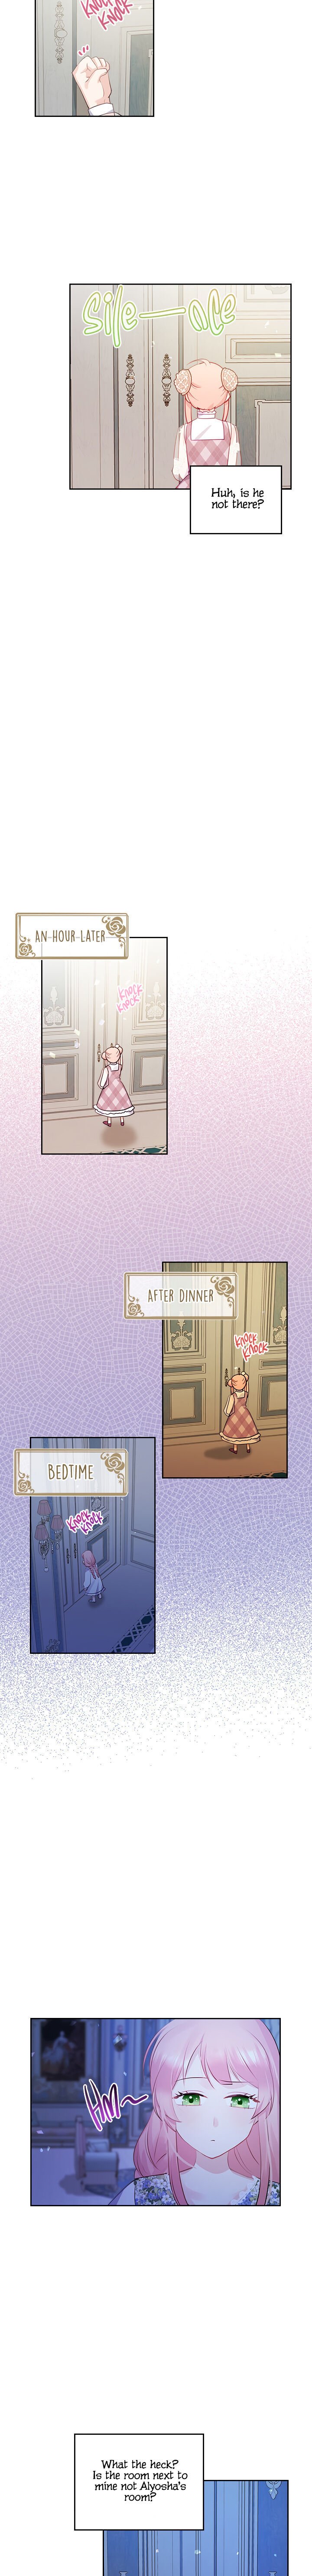 The Villainous Princess Wants to Live in a Gingerbread House Chapter 13 - Page 5